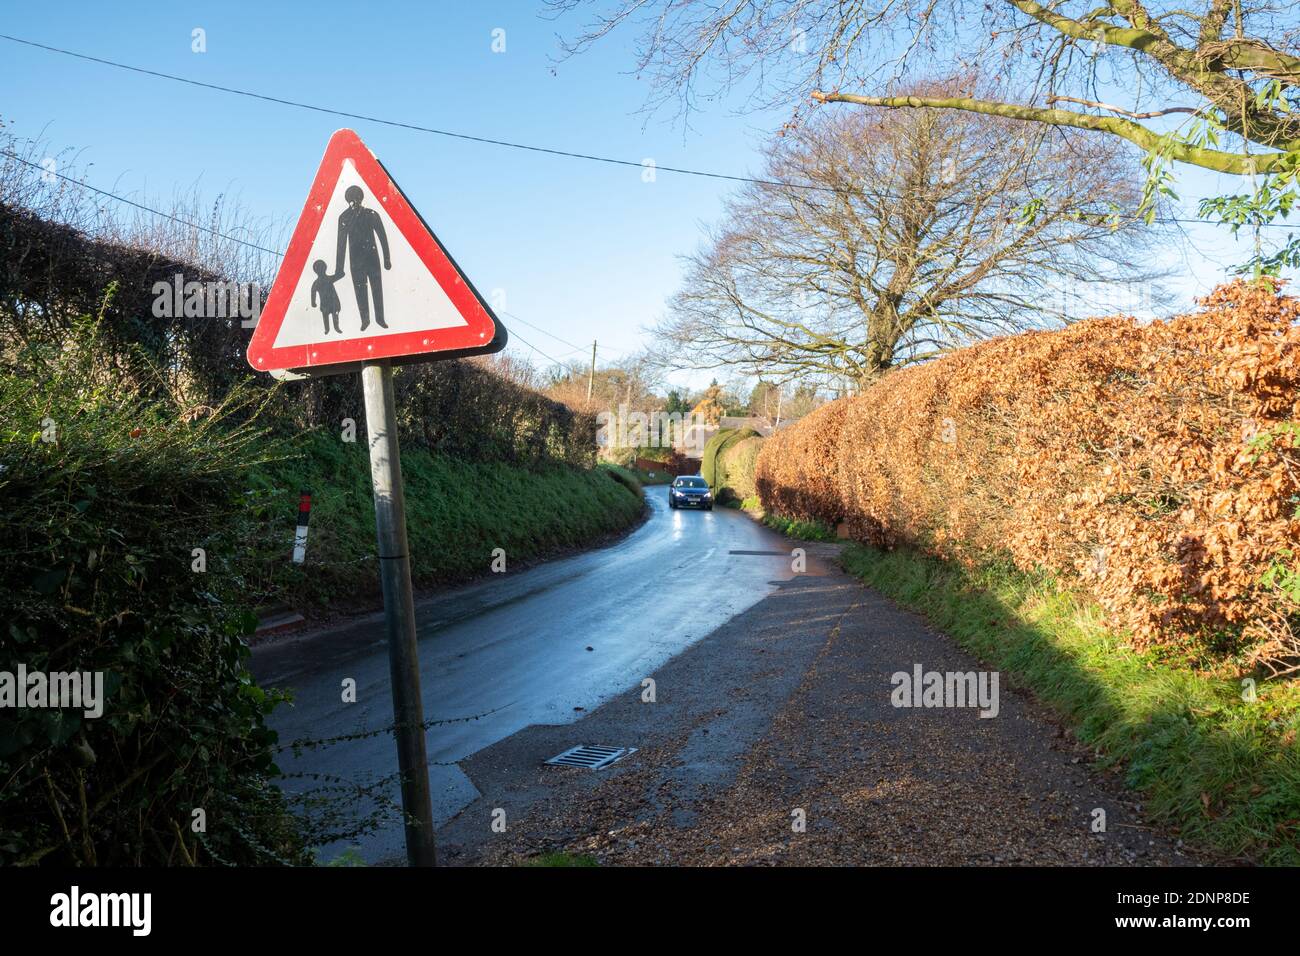 Pedestrians walking red triangle road sign with adult holding hands with a child on a narrow country road near a school, UK Stock Photo